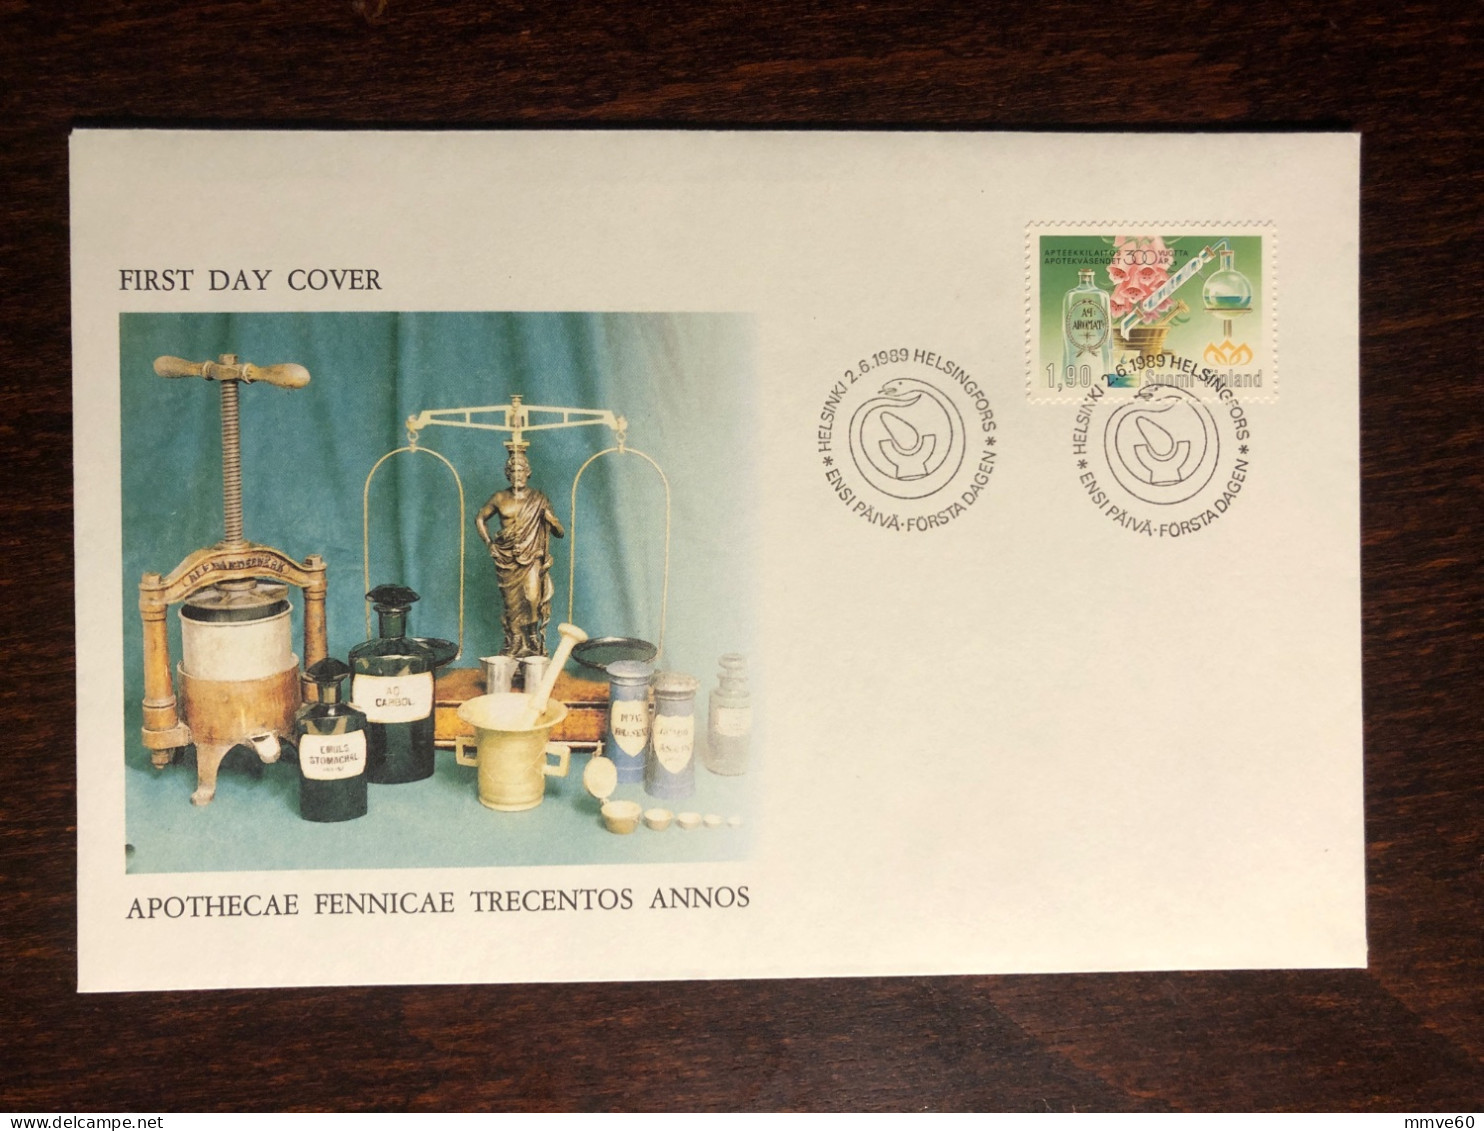 FINLAND FDC COVER 1989 YEAR PHARMACY PHARMACOLOGY HEALTH MEDICINE STAMPS - Covers & Documents